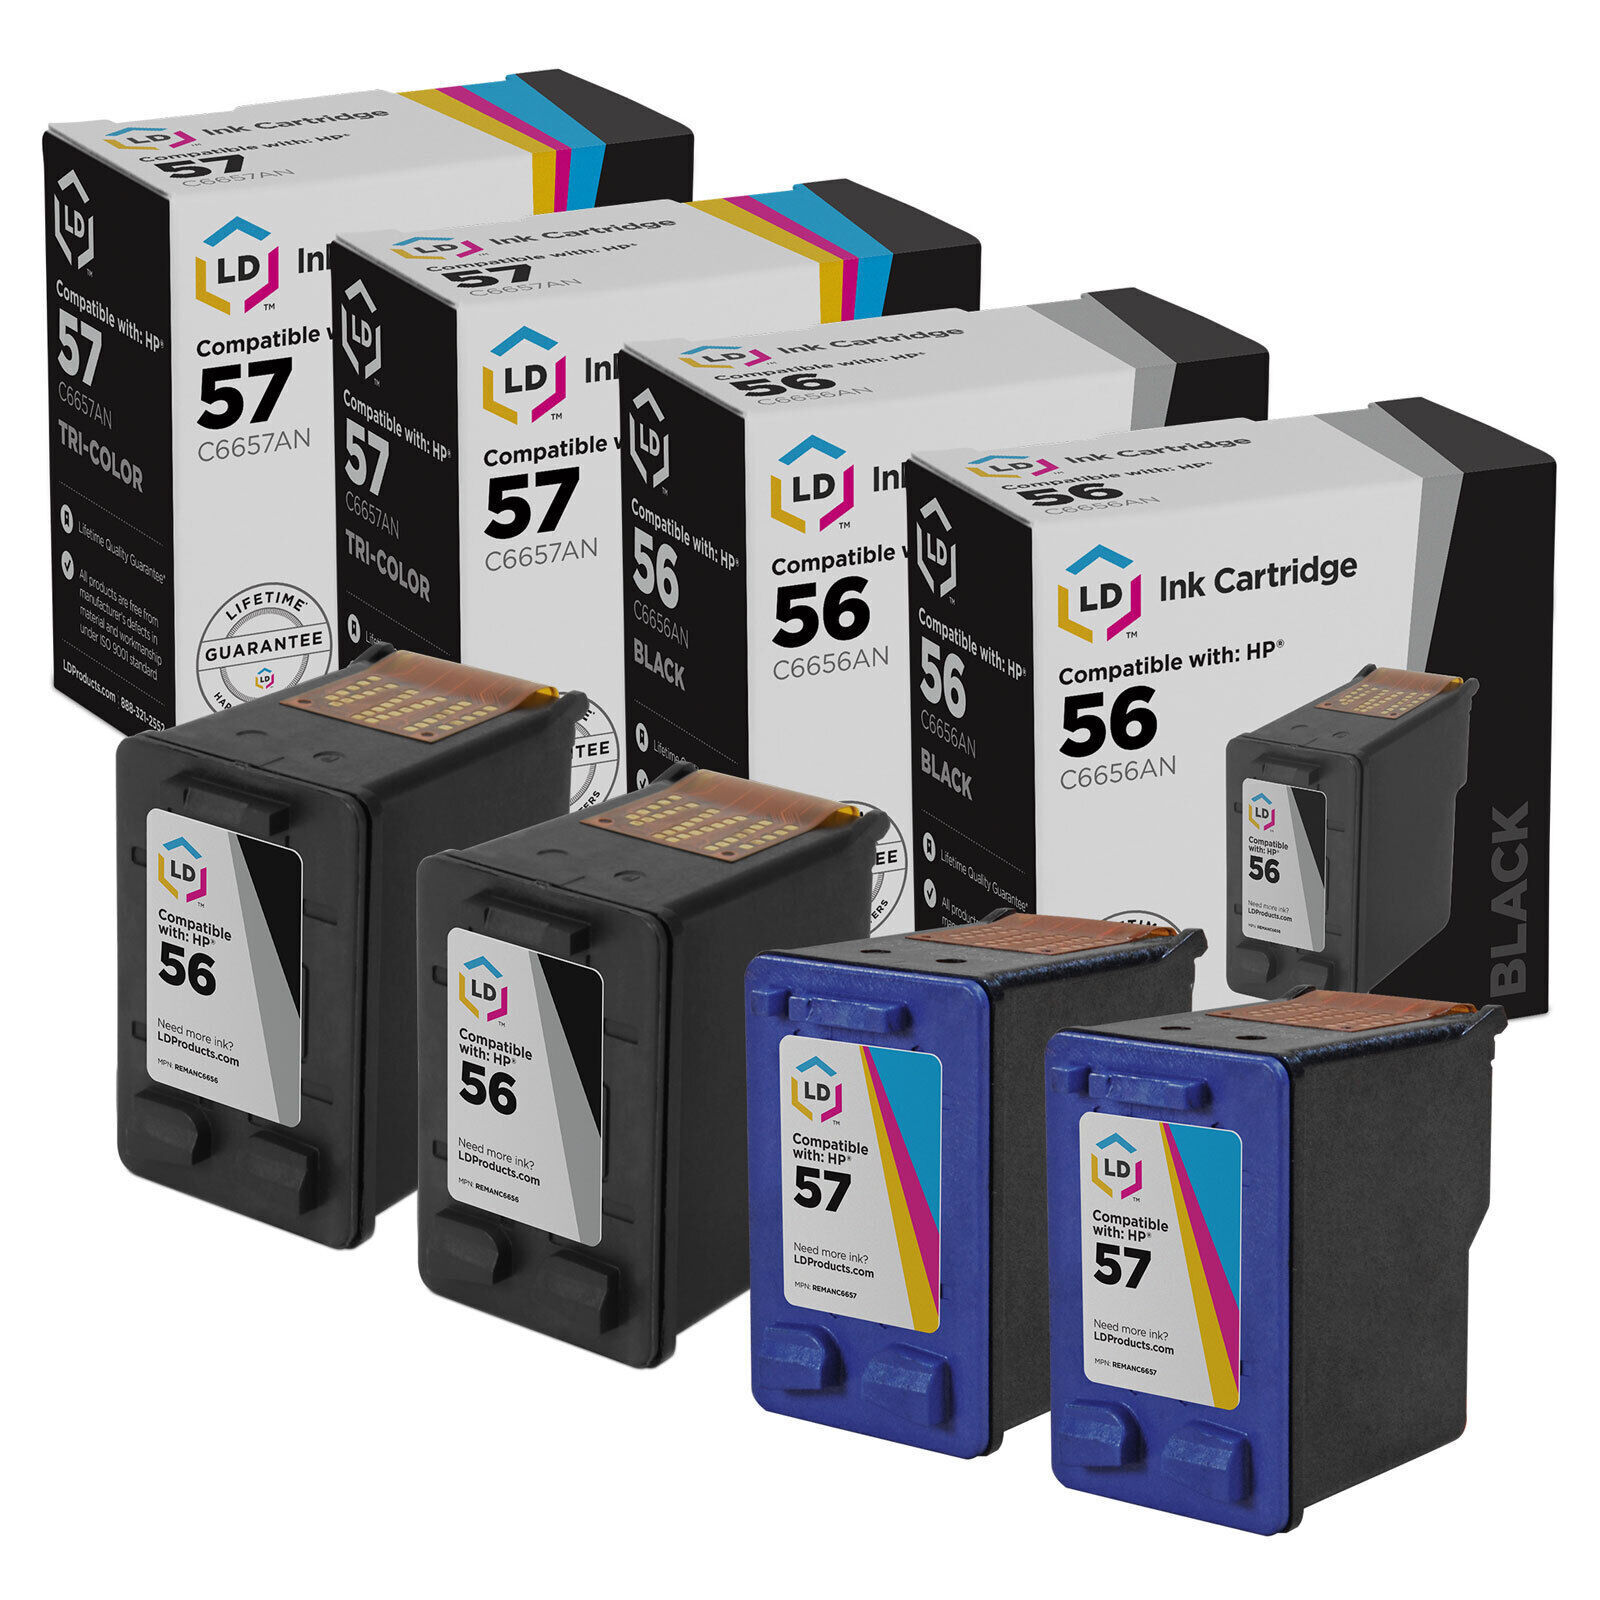 LD Reman Replacements Fits for HP 56 C6656AN HP 57 C6657AN 2 Black & 2 Color